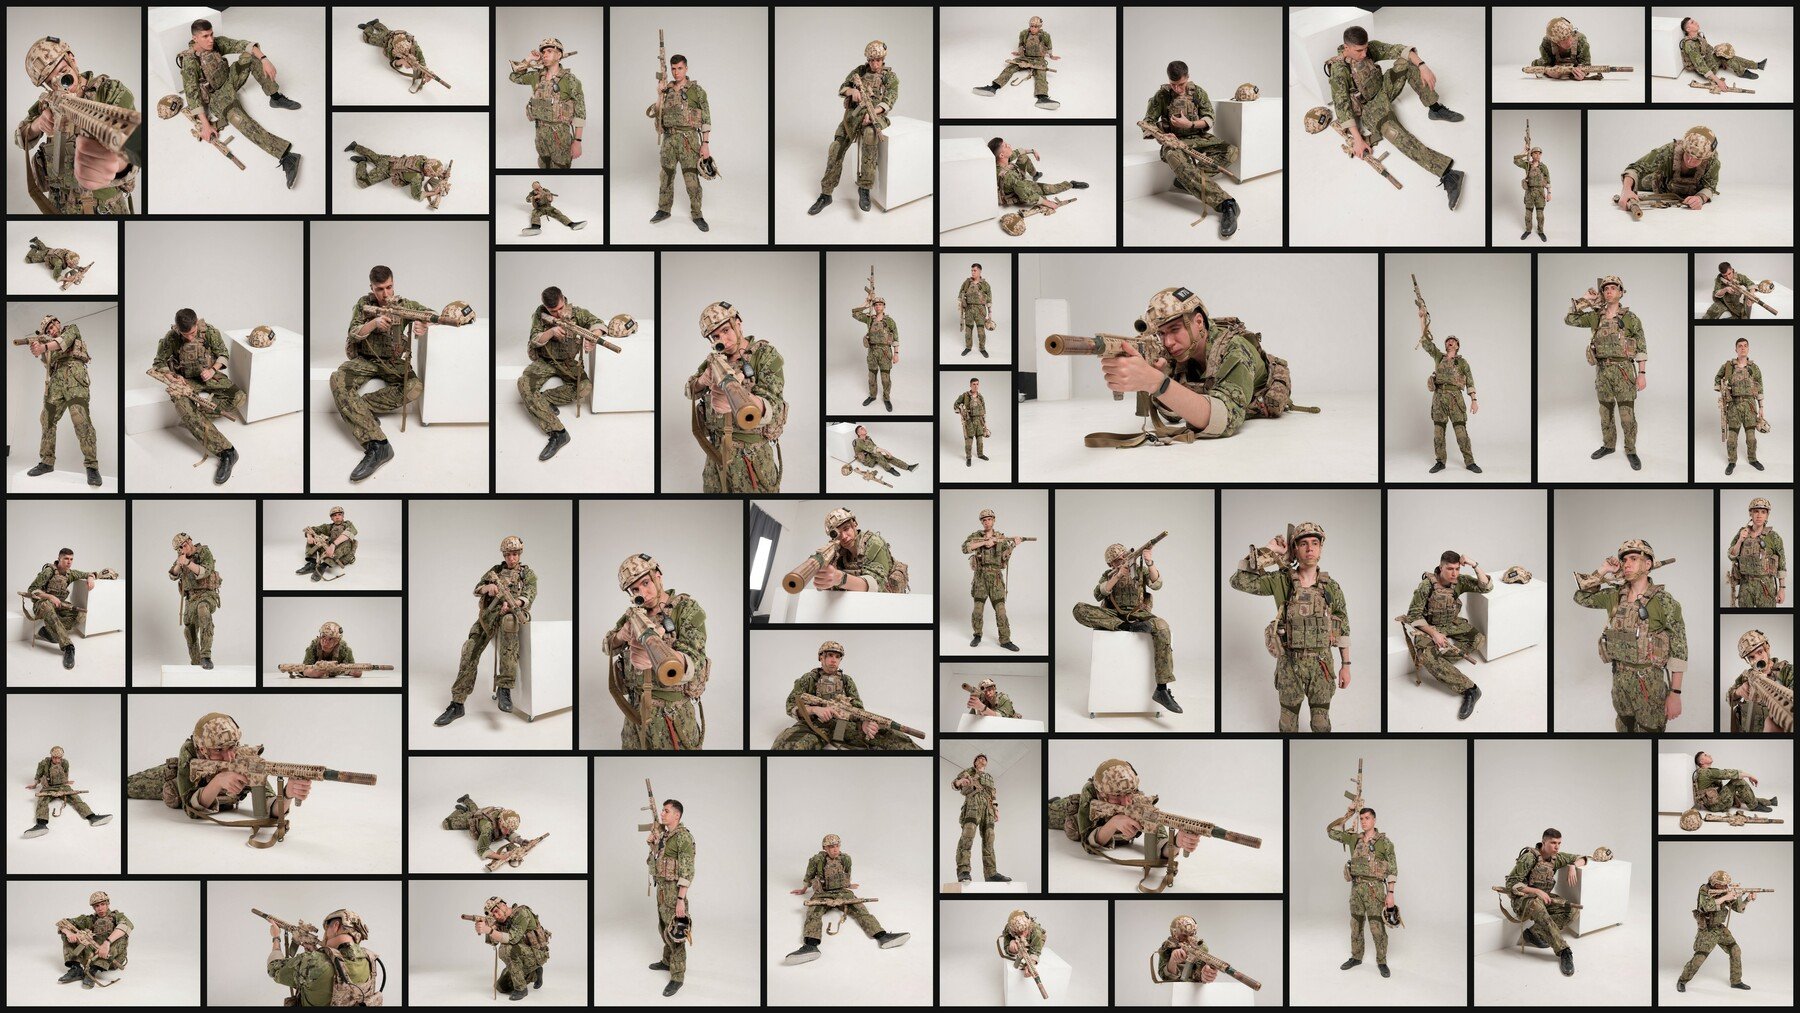 210+ Military Pose References for Artists